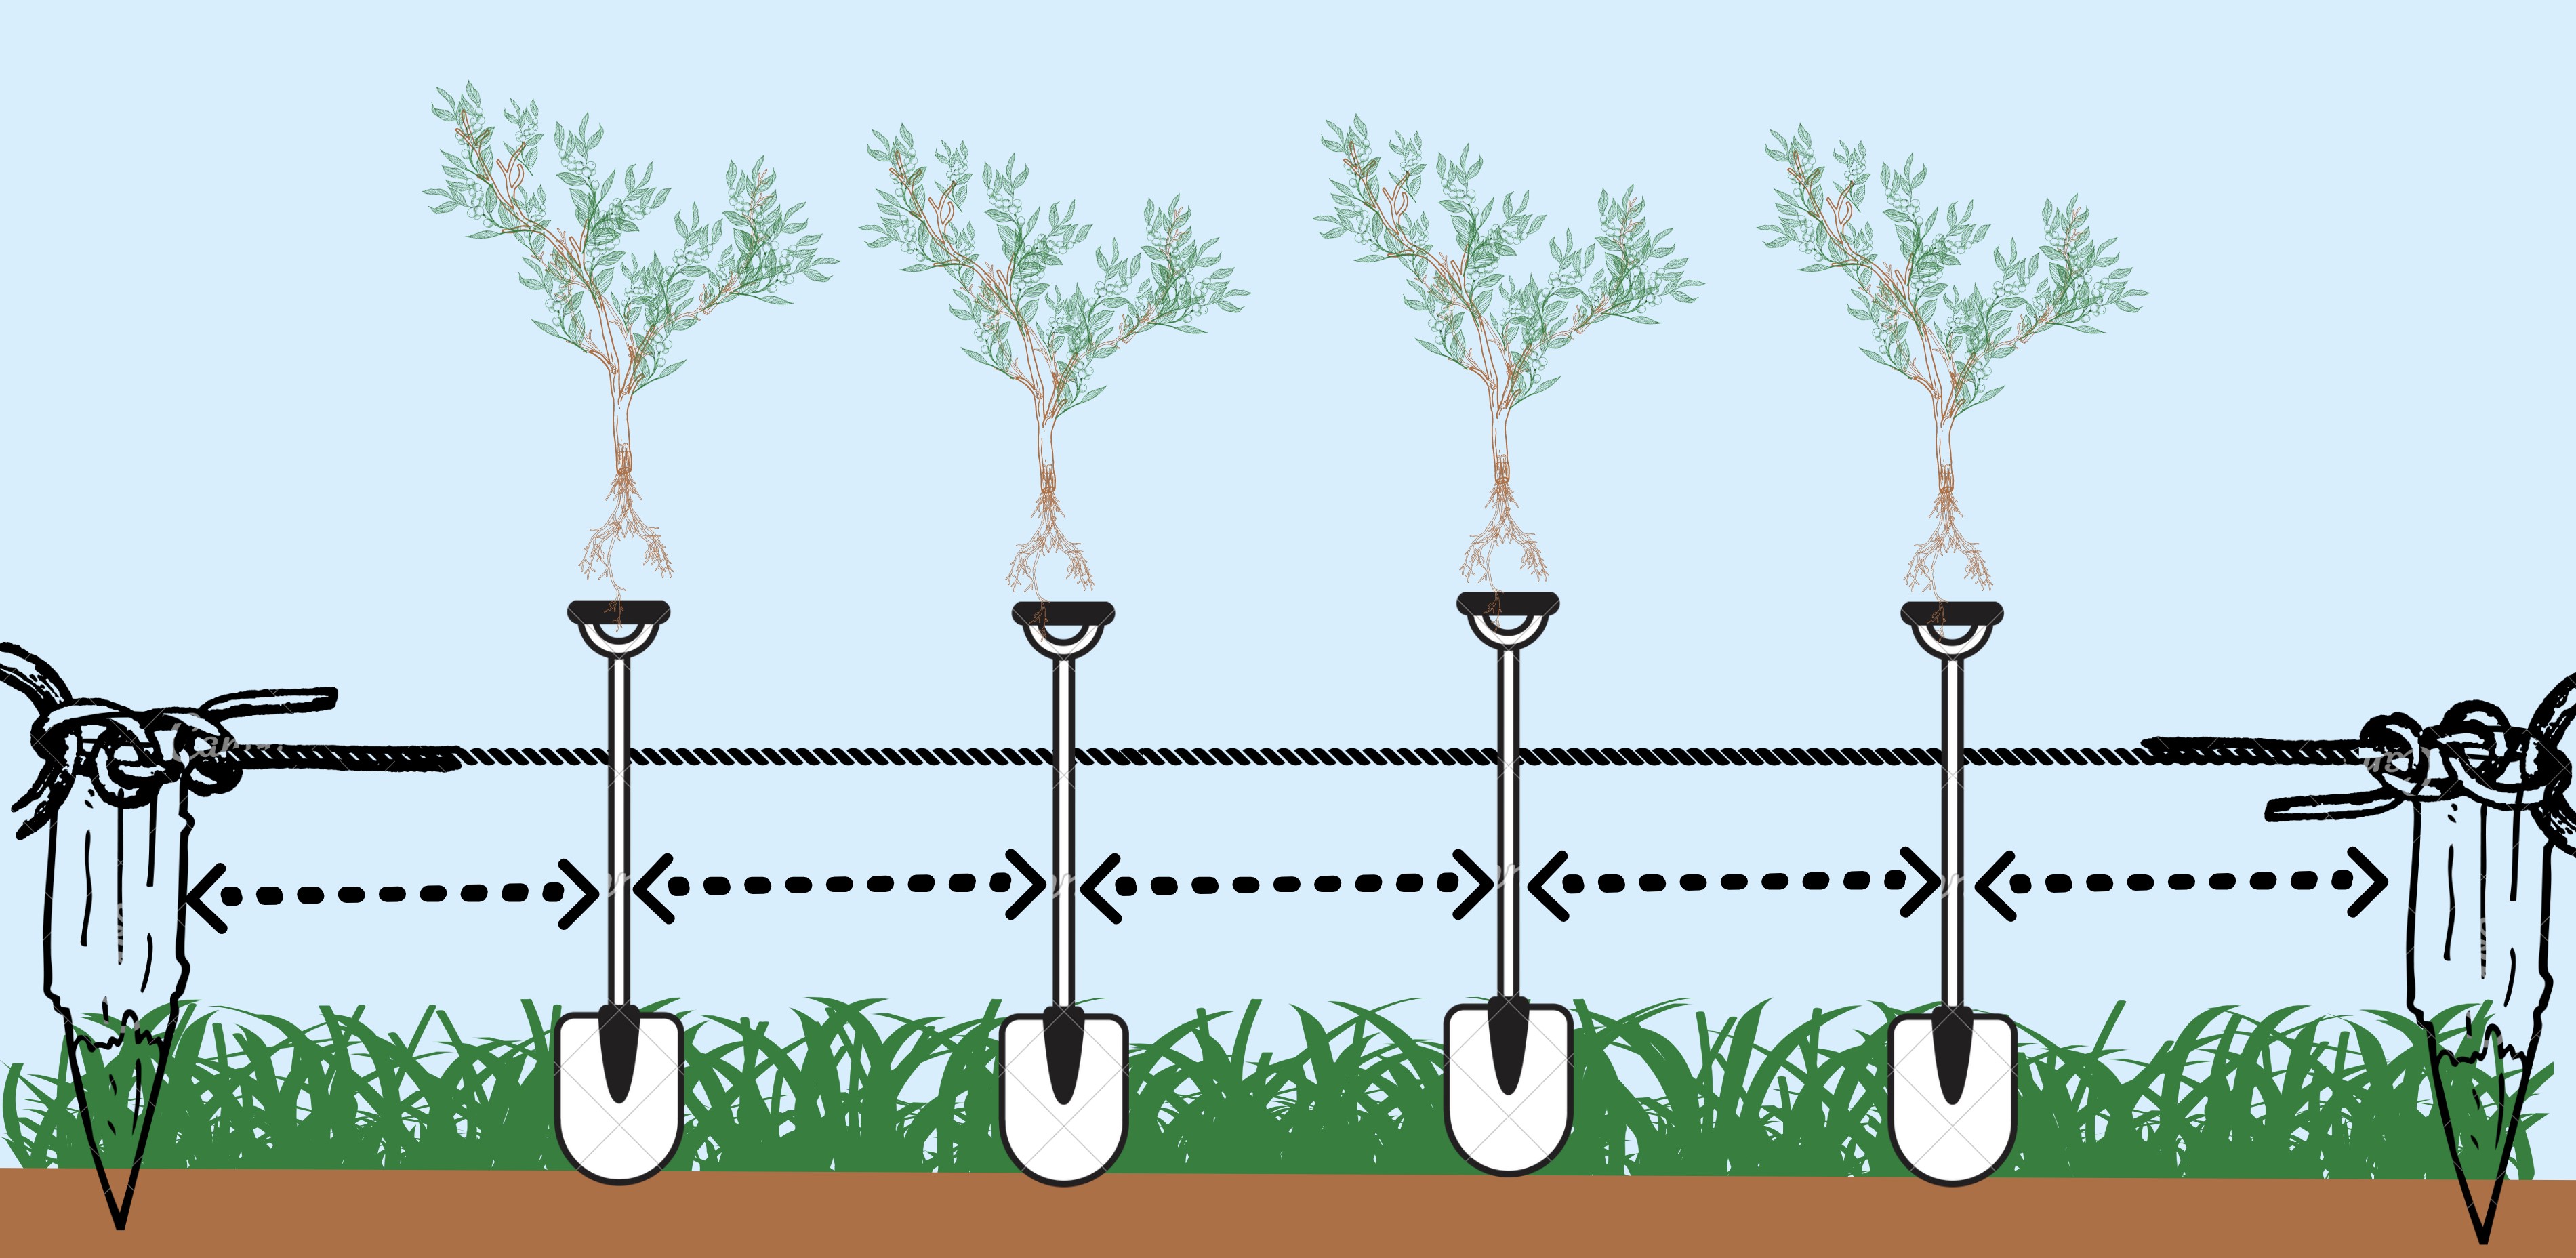 Coffee Trees Planting and Plant Spacing